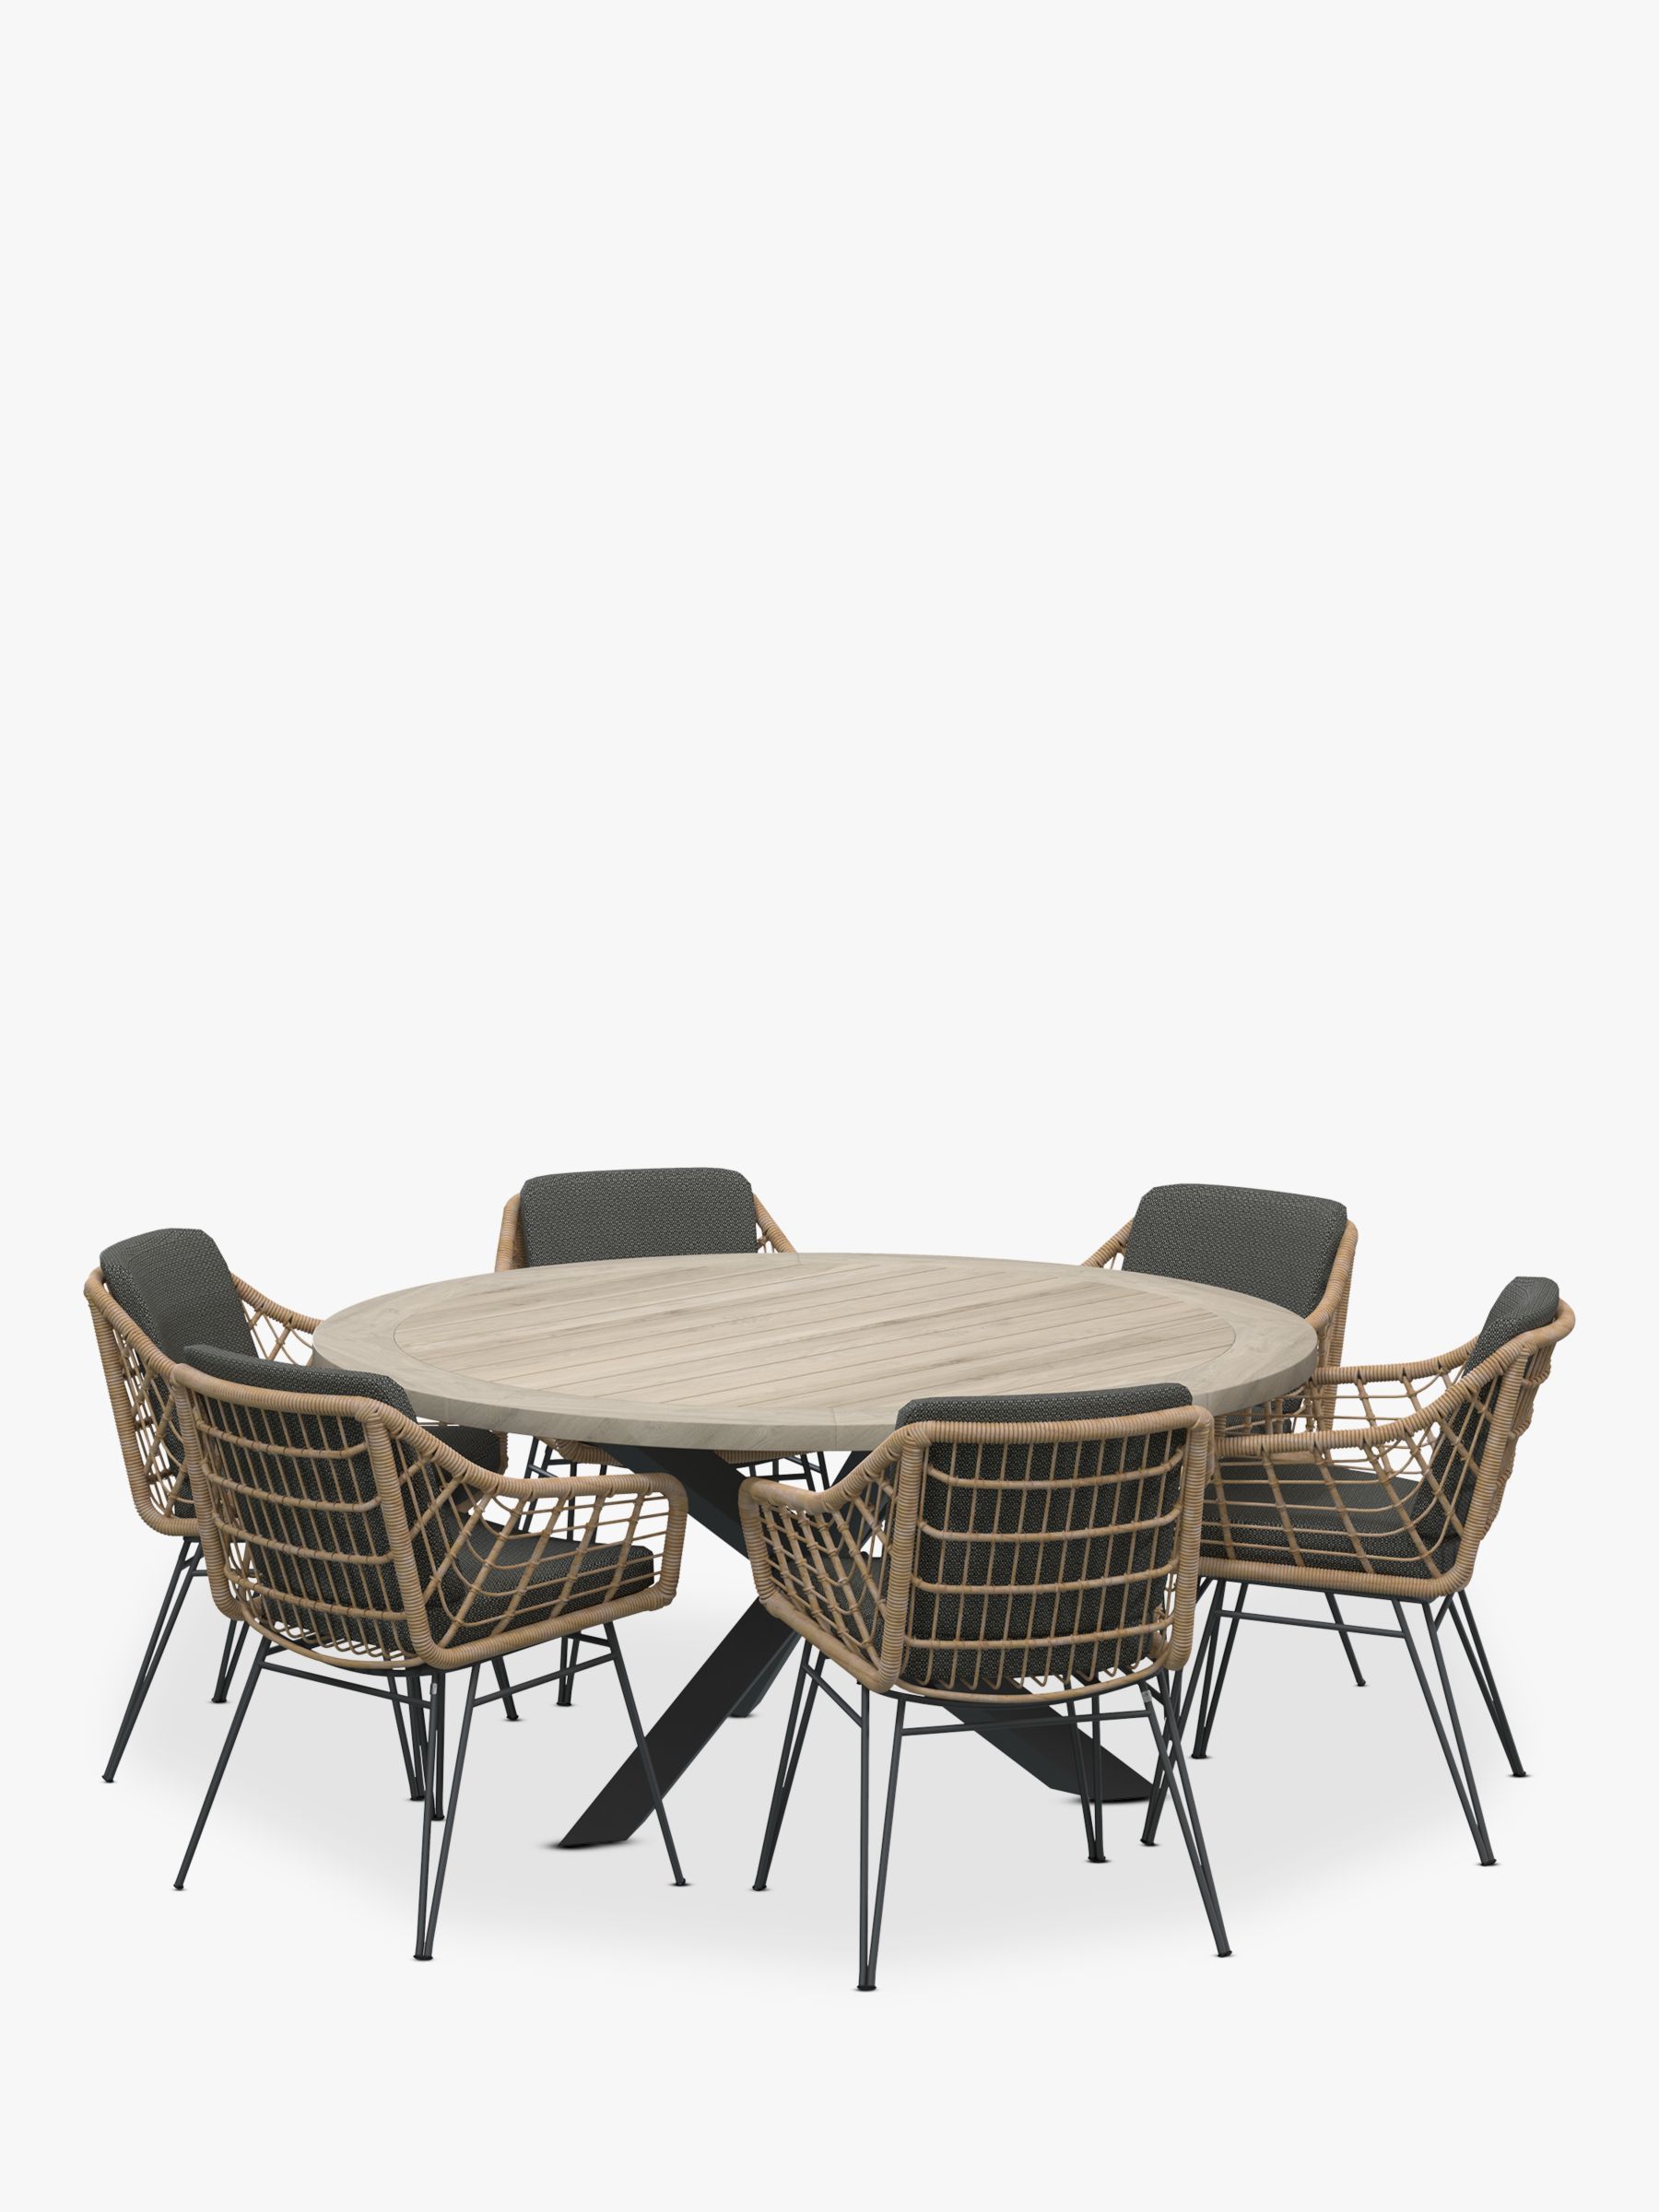 6 Seater Round Garden Dining Table, 6 Seater Round Dining Table And Chairs Garden